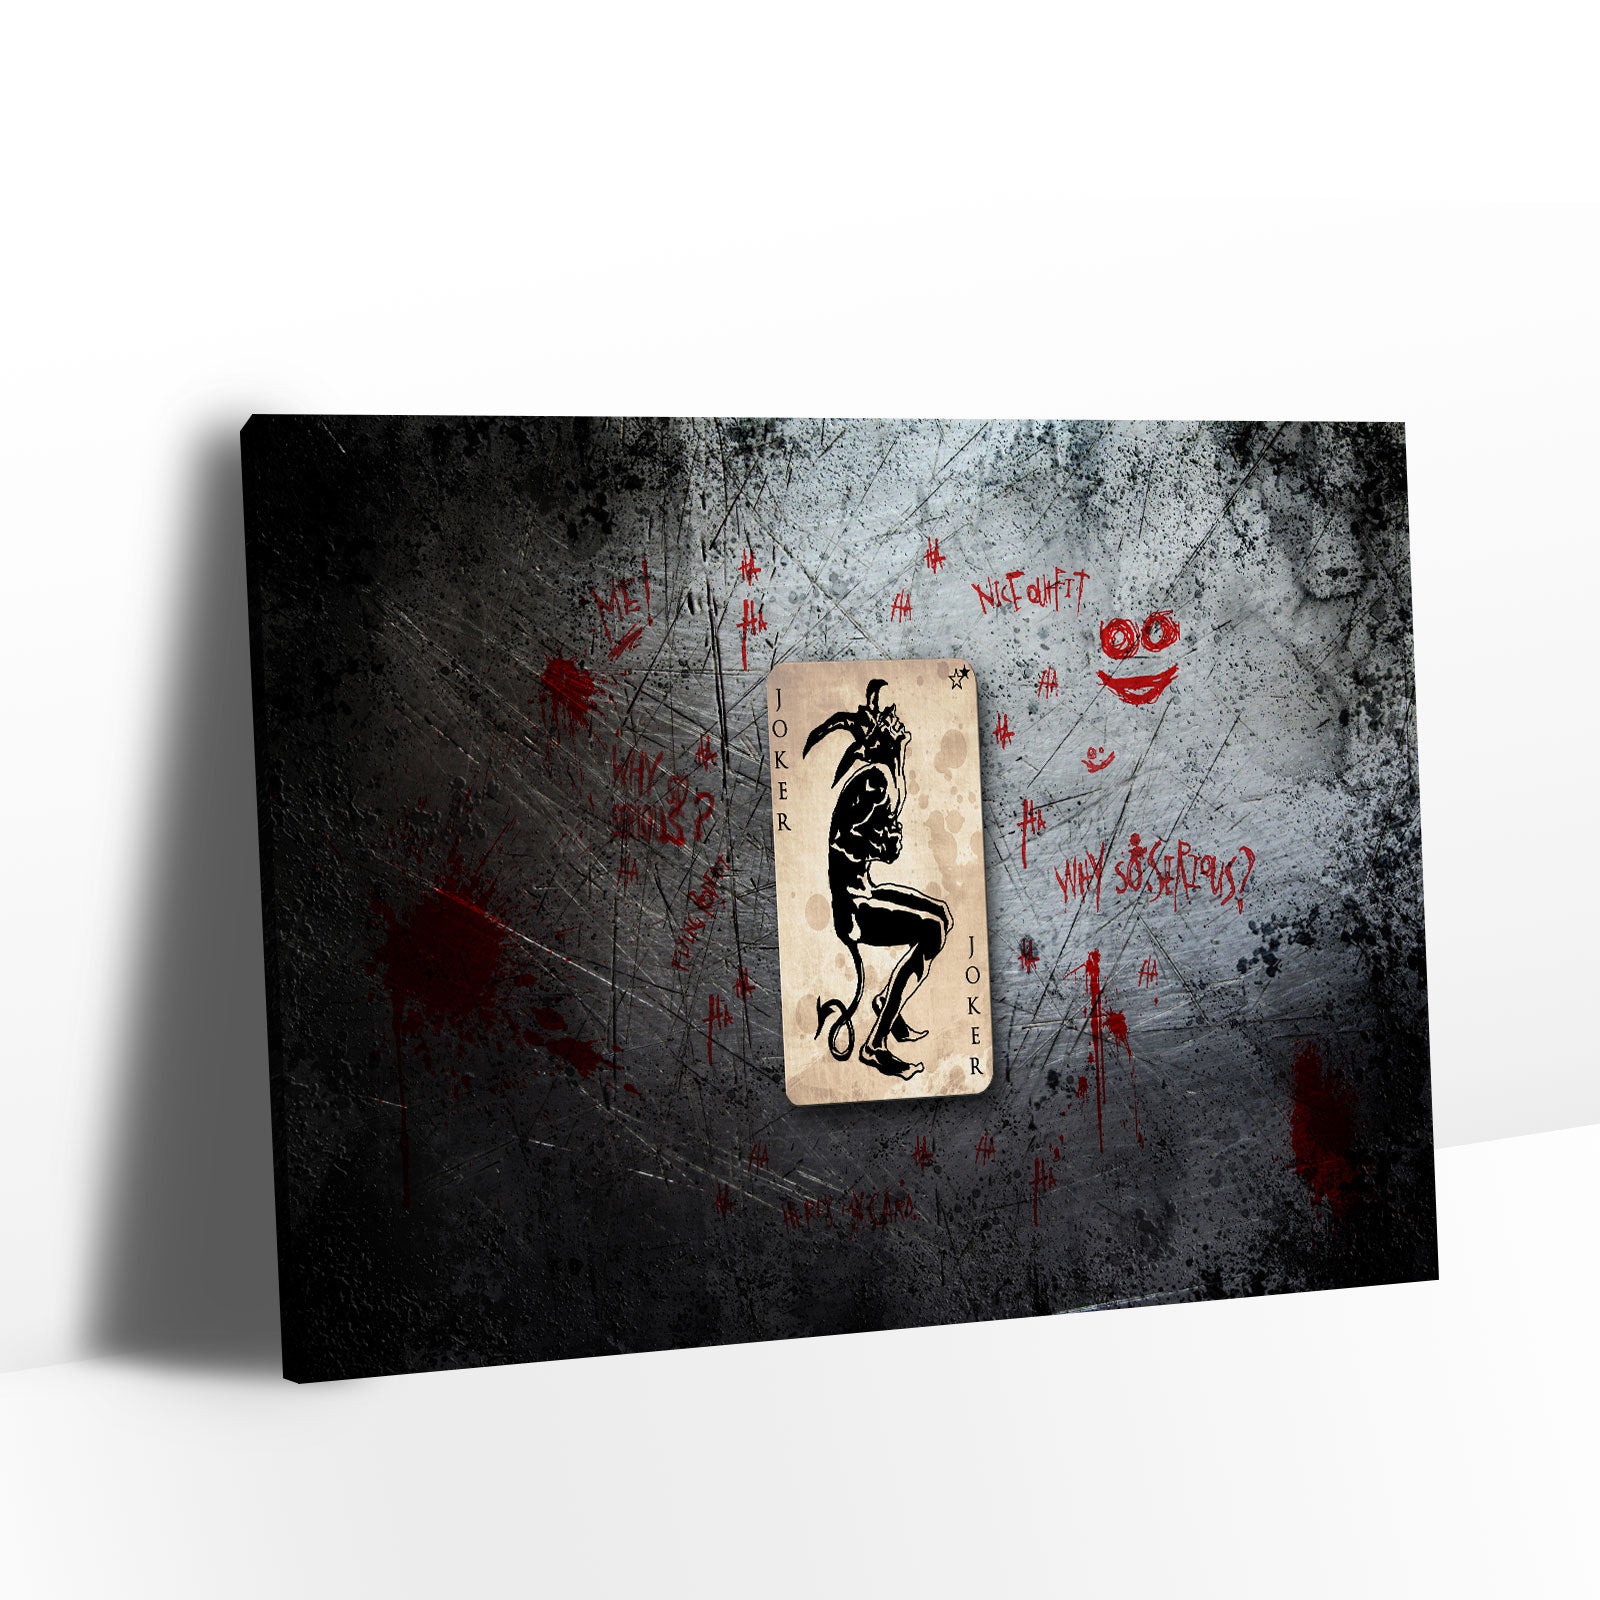 "Why So Serious" Joker Sign Canvas Wall Art